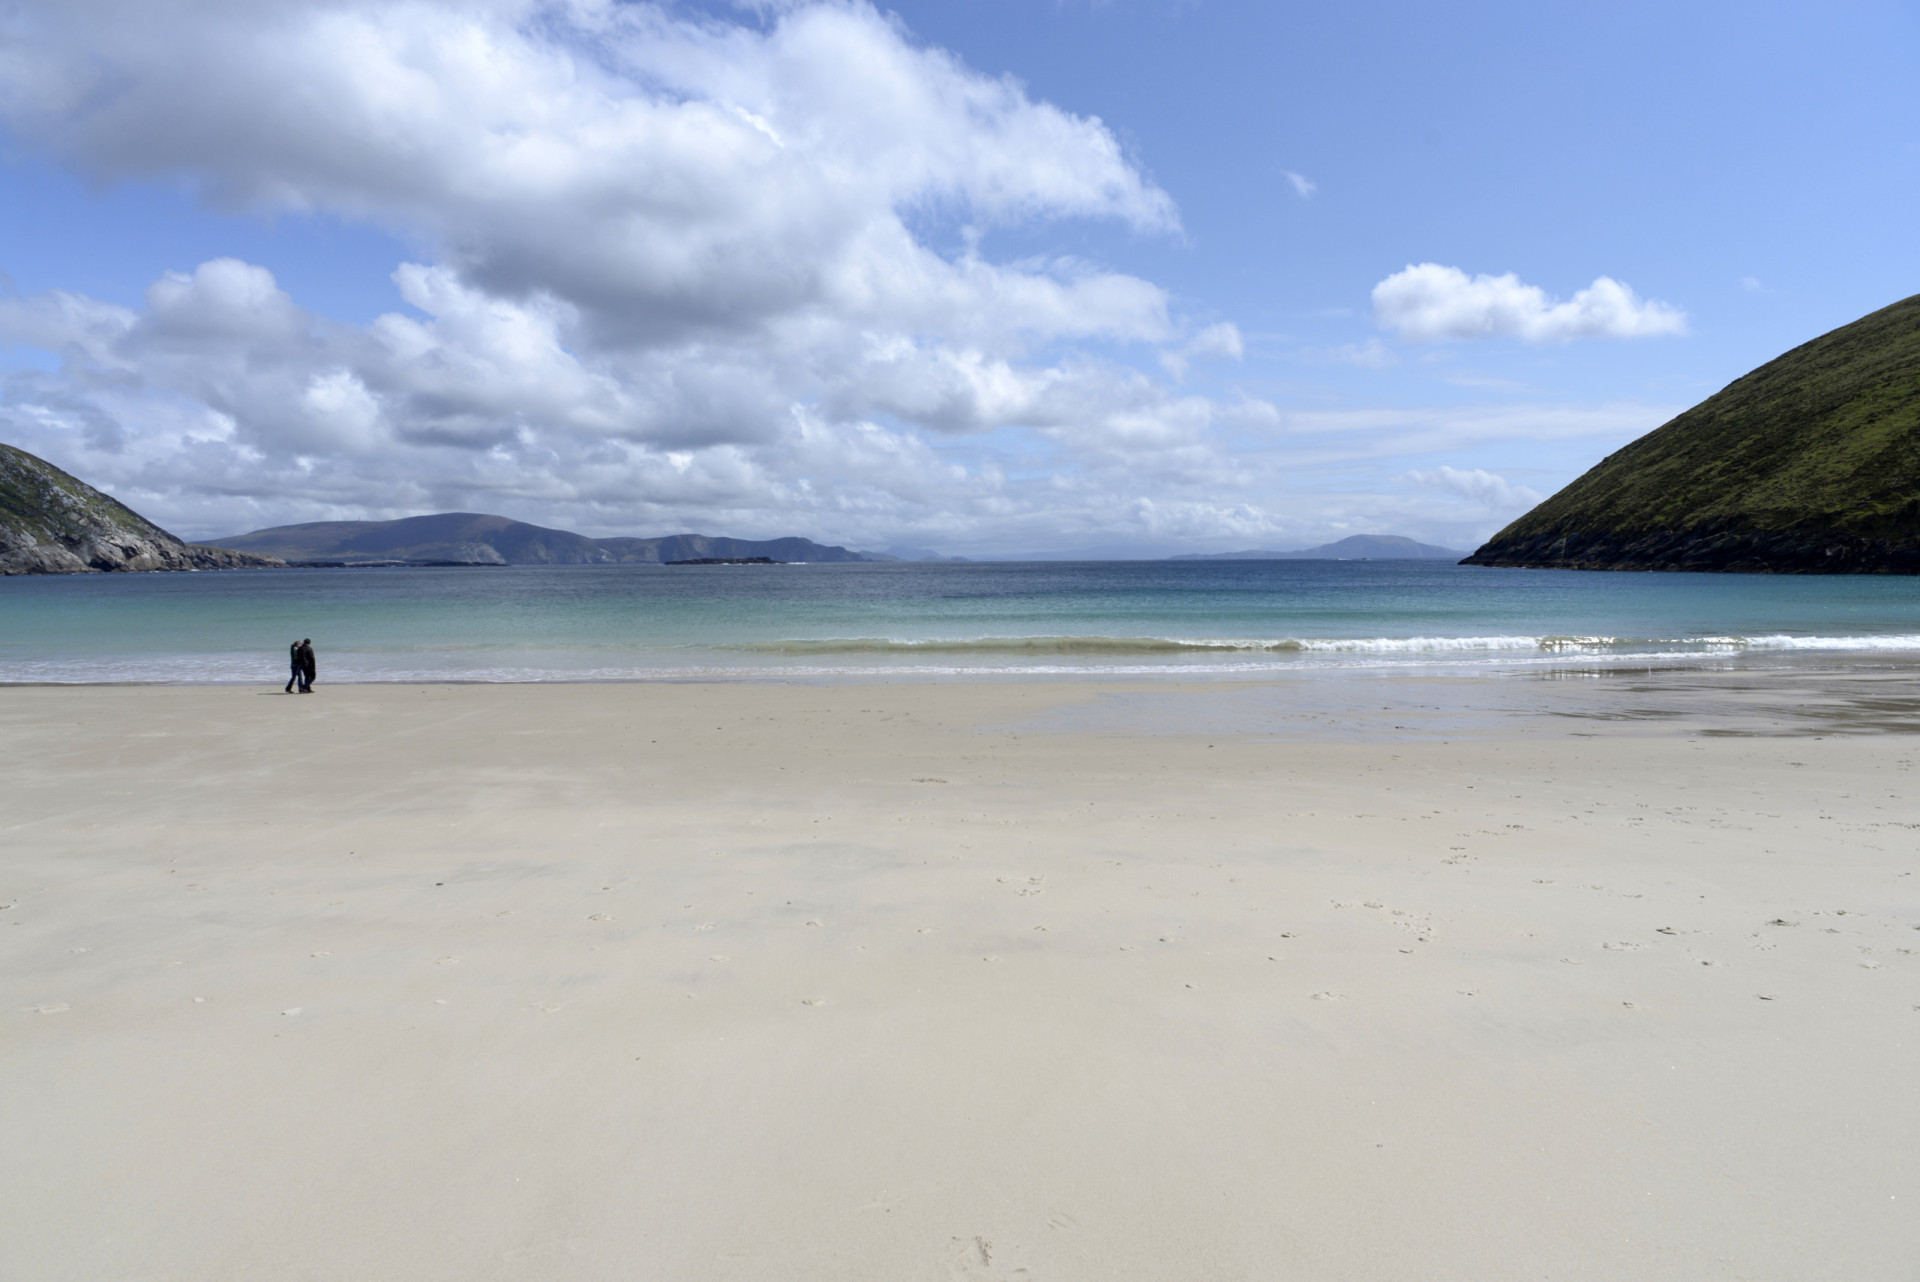 <p>The pristine beach at Keel, with gentle rolling waves, makes this spot one of the best in Ireland for surfing, thanks to exposure to swells from the south and west almost year round.</p><p>You may also like:<a href="https://www.starsinsider.com/n/274300?utm_source=msn.com&utm_medium=display&utm_campaign=referral_description&utm_content=621106en-au"> Cheapest homes in Australia that even you can afford</a></p>